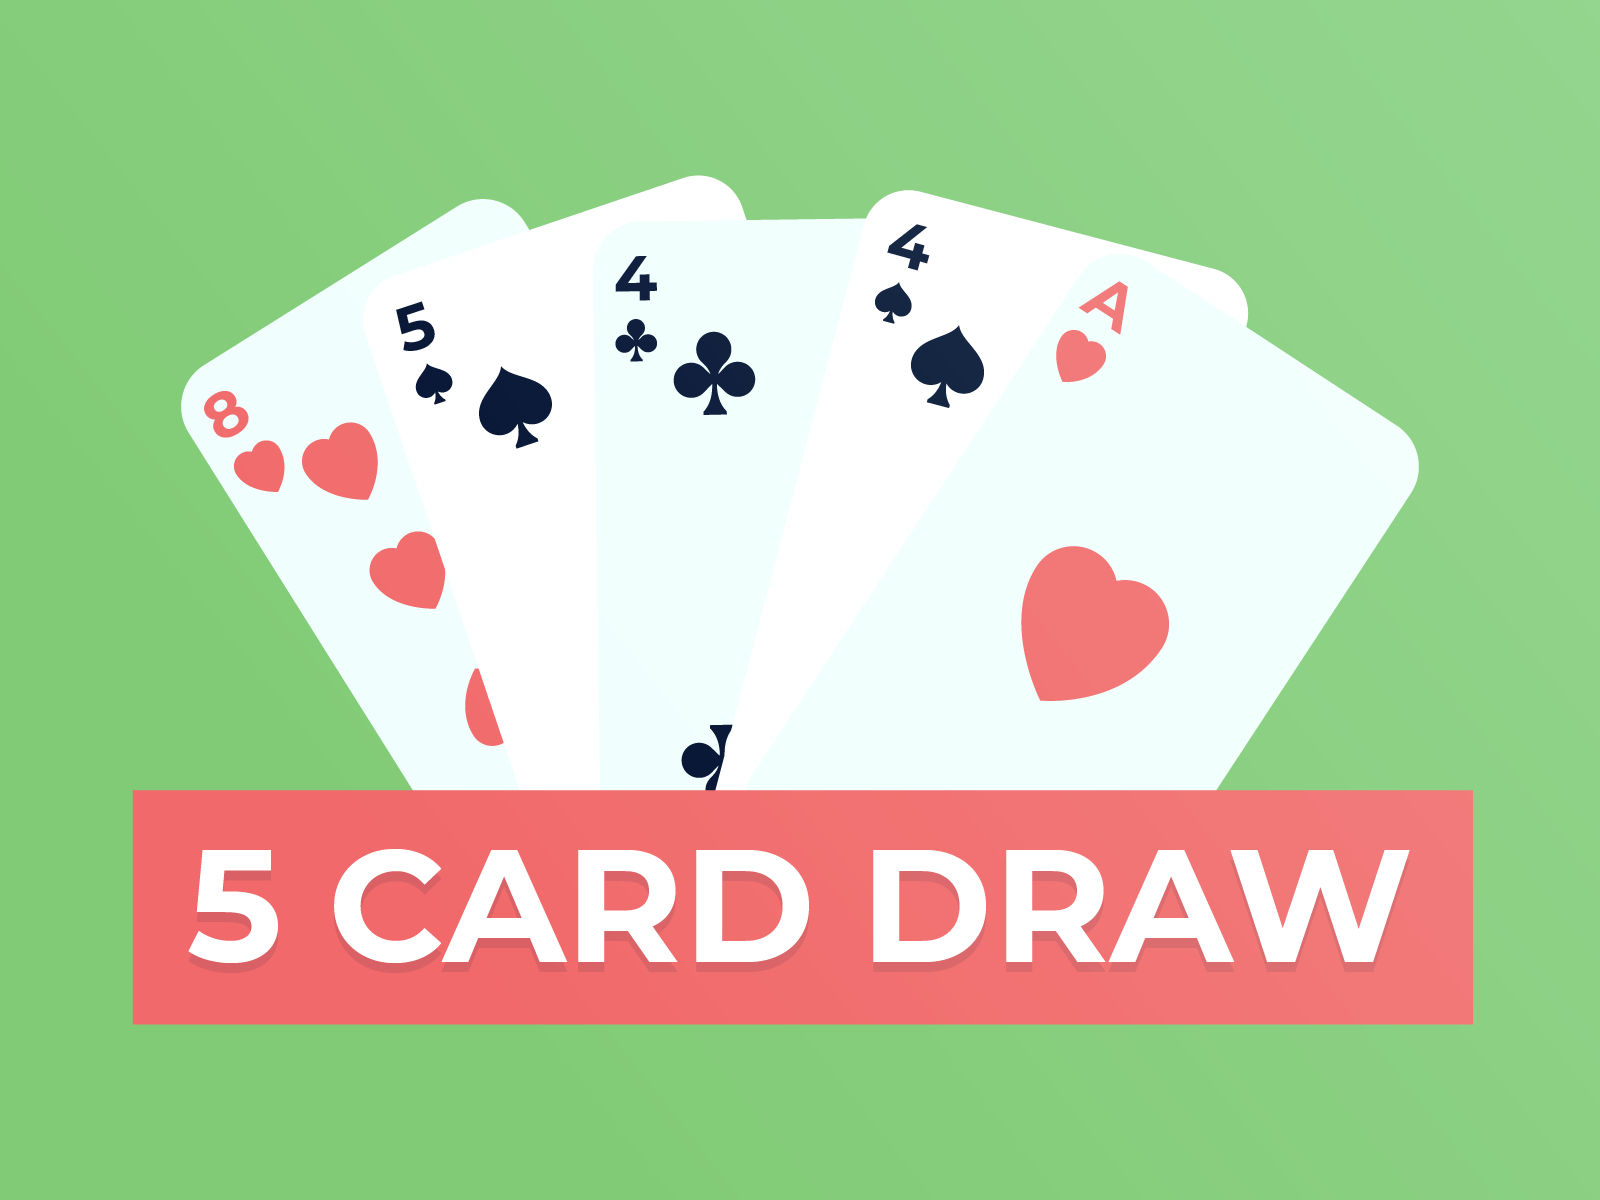 pierce Closely In the mercy of How To Play 5 Card Draw Poker – 5 Card Draw Rules, Odds, Tips & More